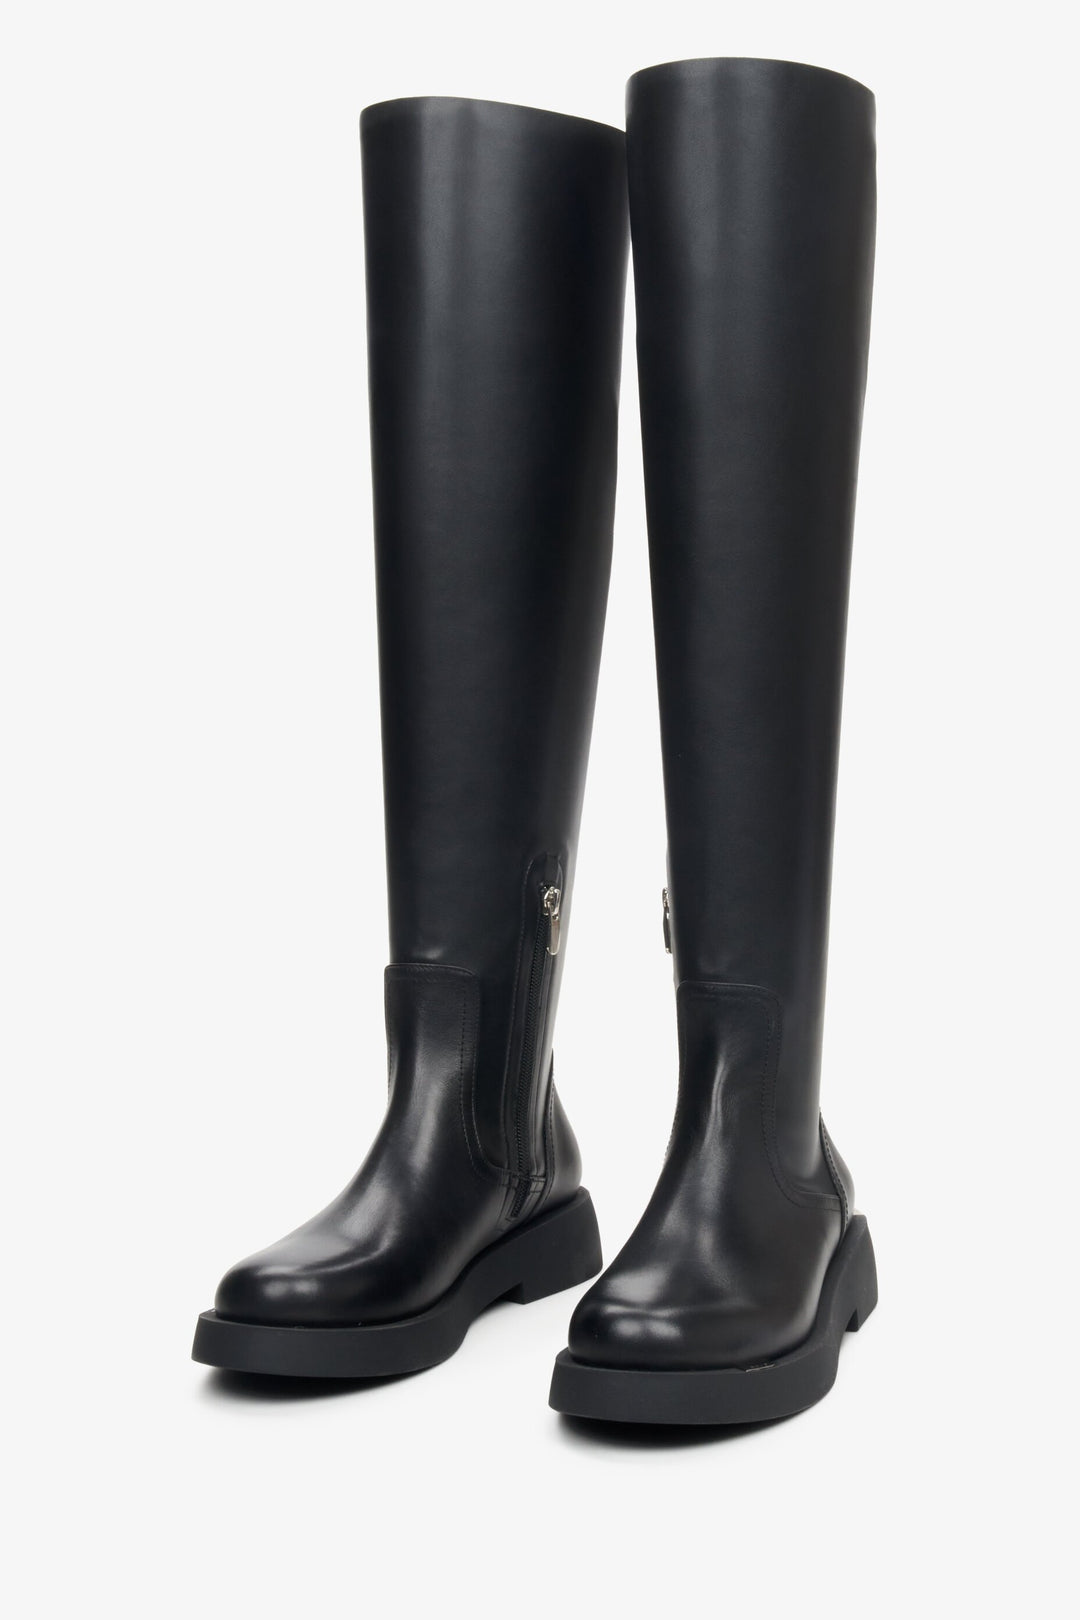 Soft genuine leather black knee-high boots in black.